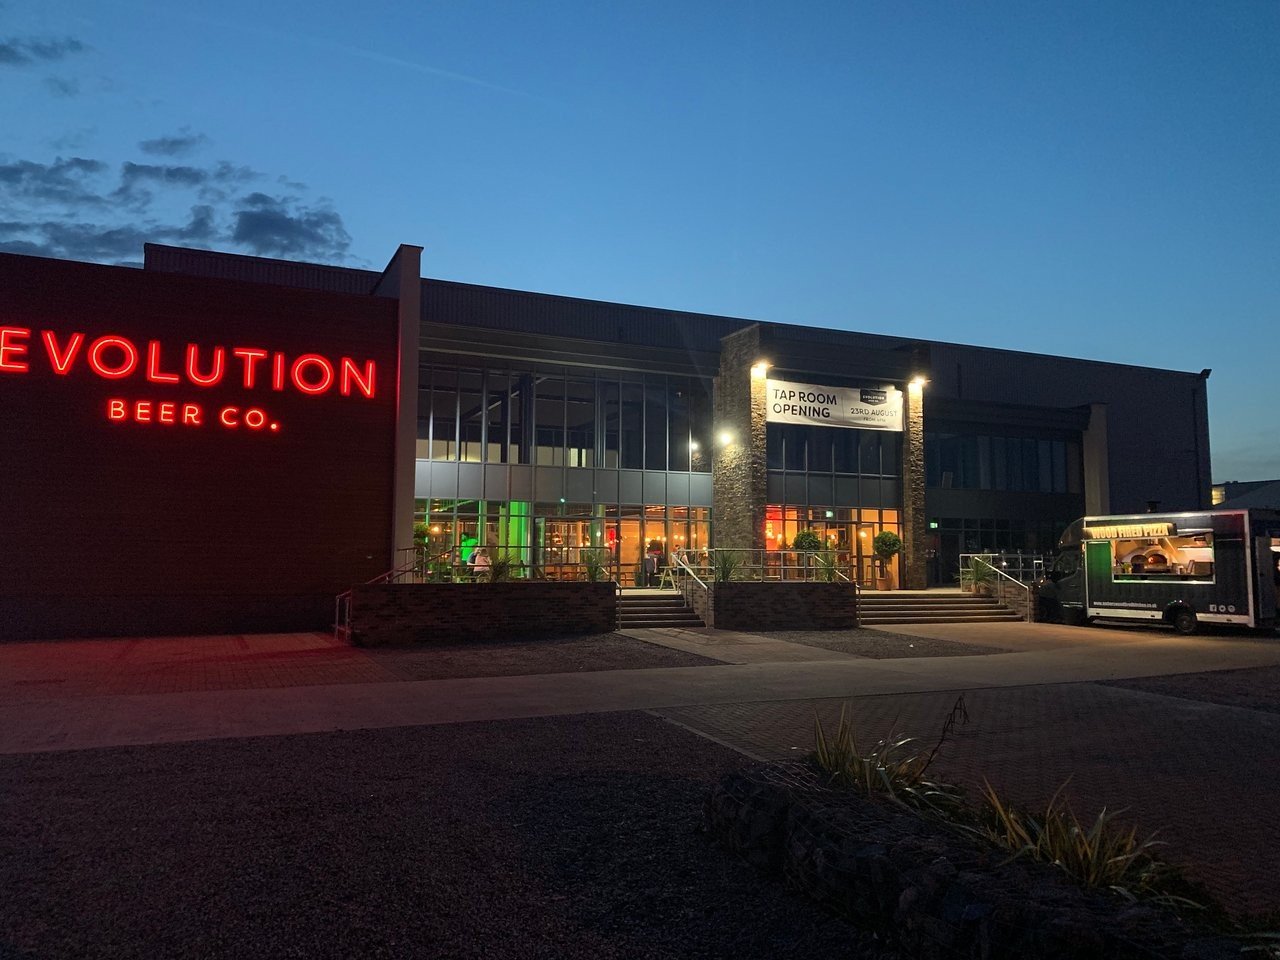 Evolution Beer brewery from United Kingdom